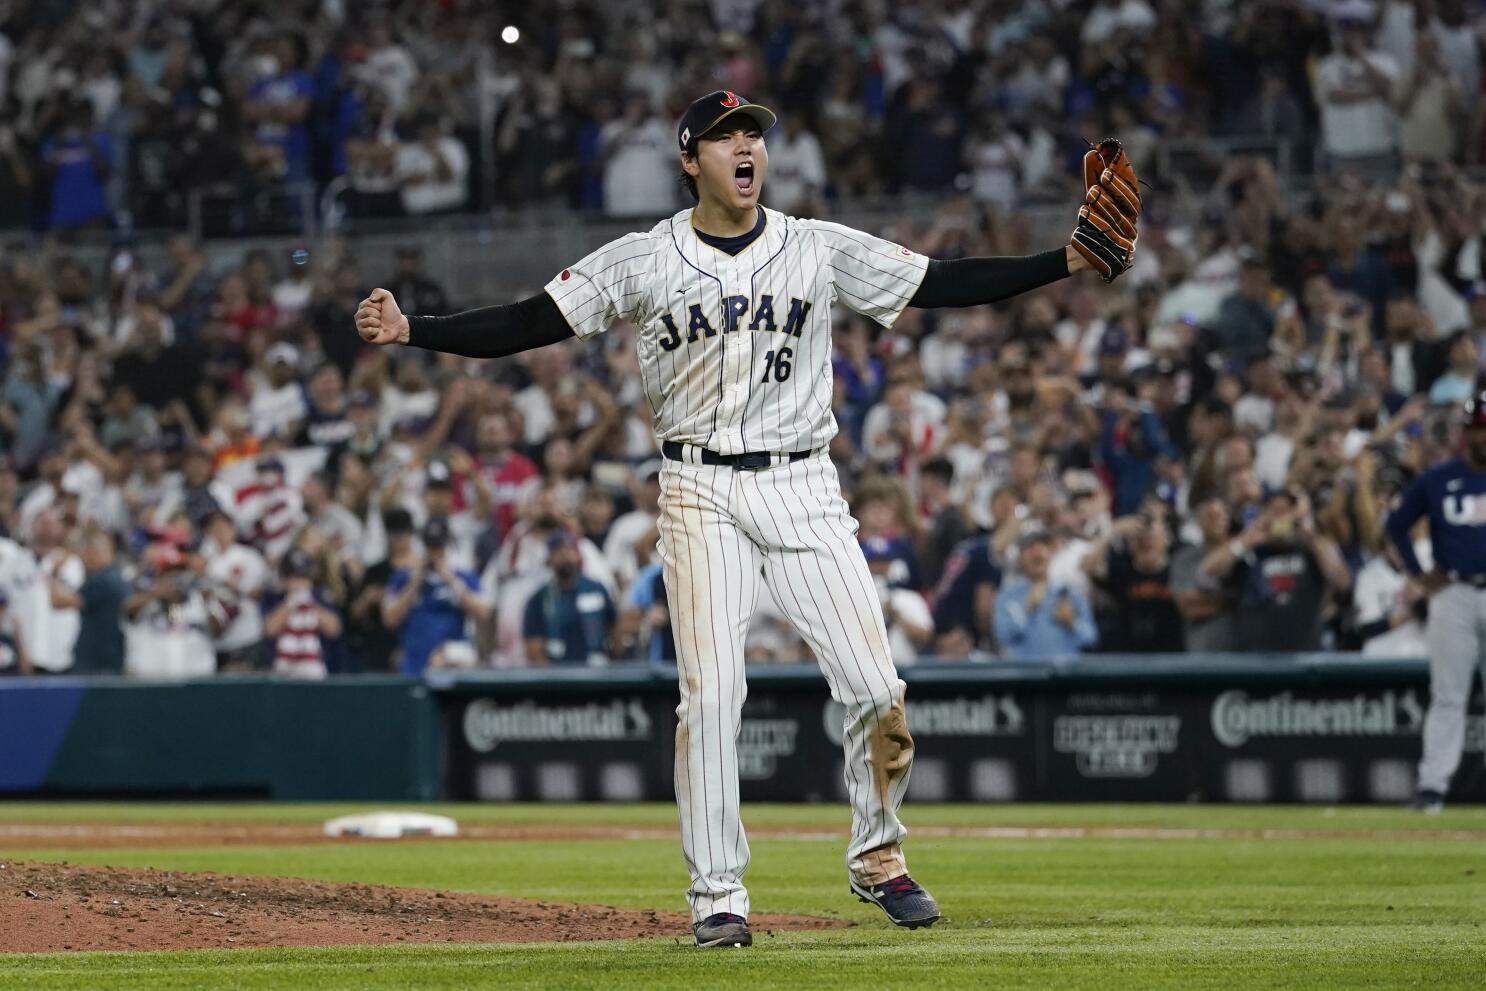 Shohei Ohtani willing to relieve if Japan reaches WBC final - The